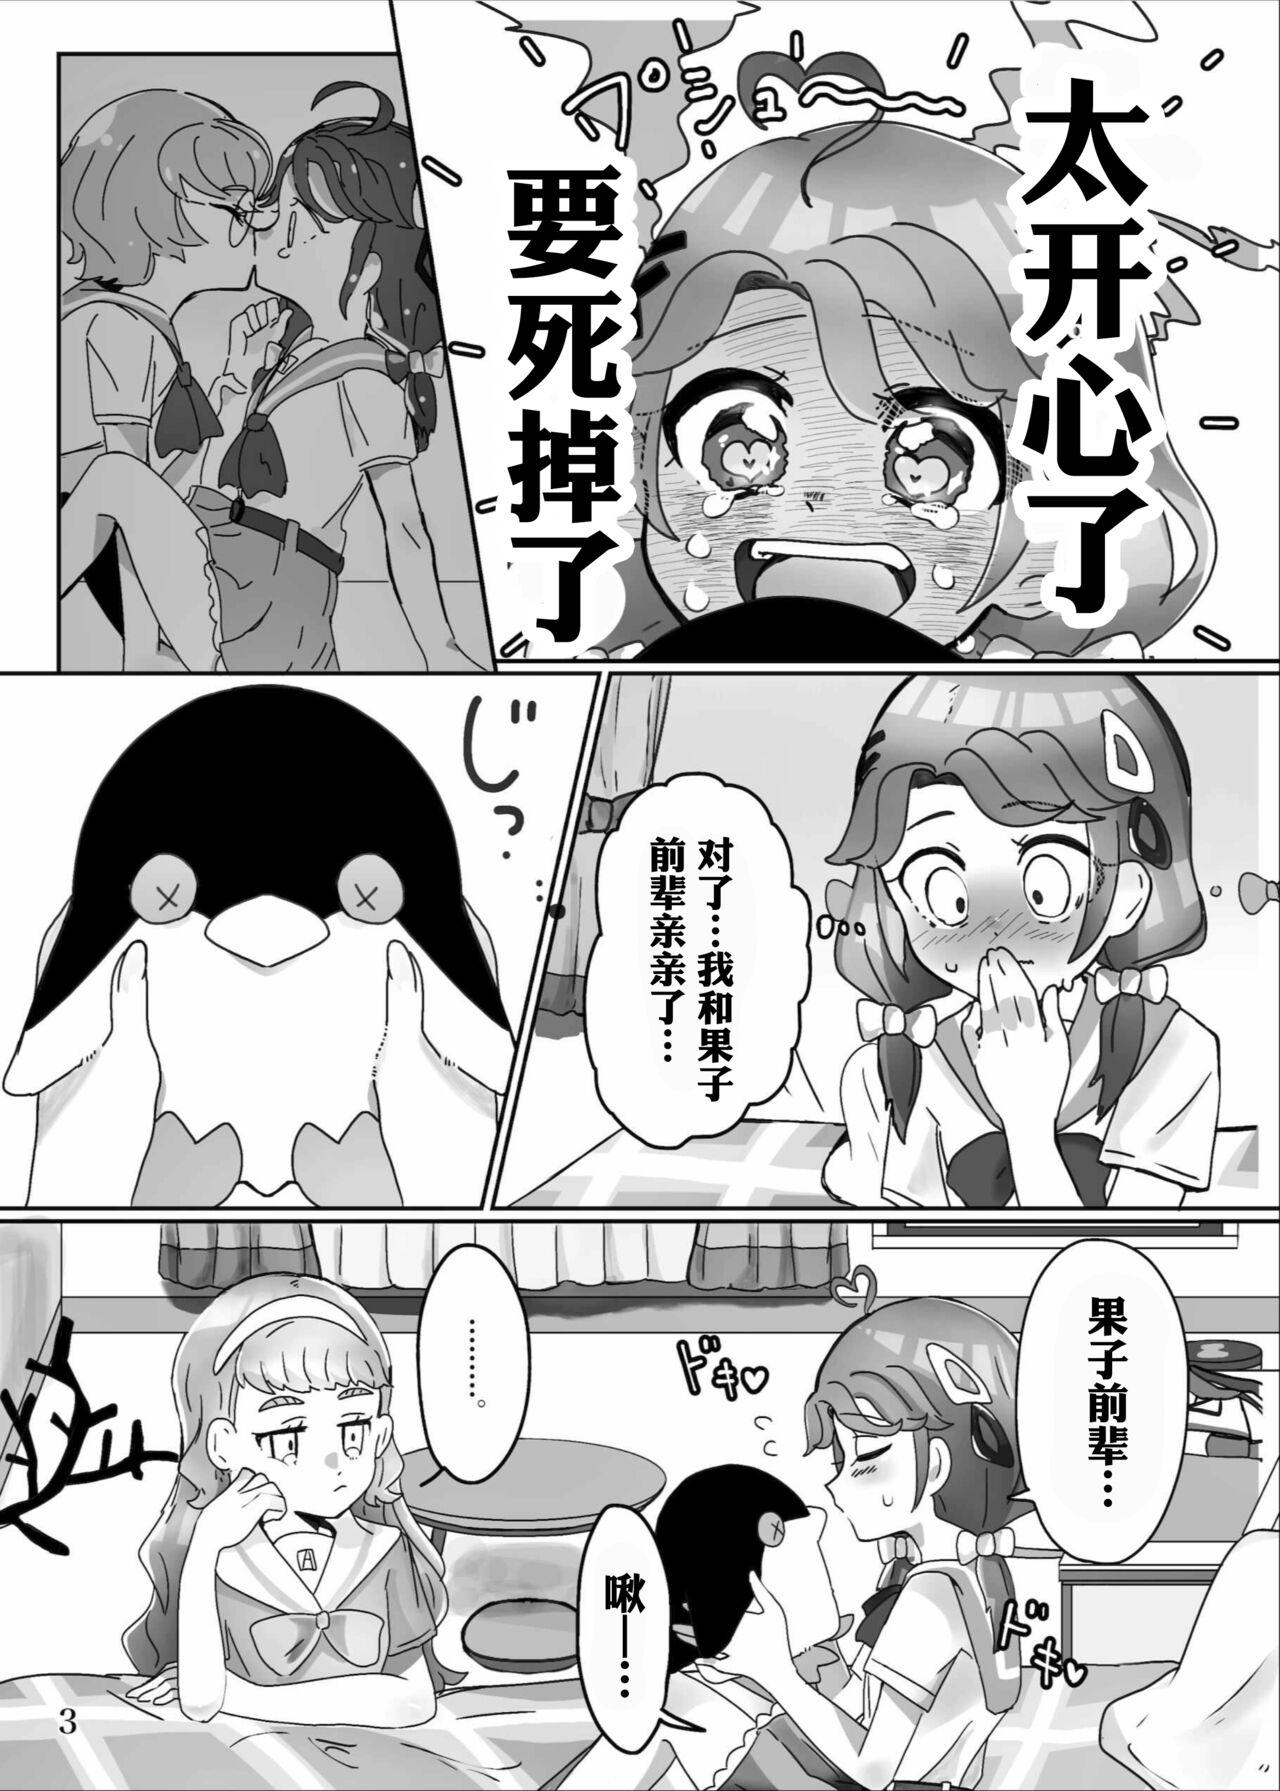 Wives yaritaigotone do my best - Pretty cure Tropical rouge precure Upskirt - Page 5